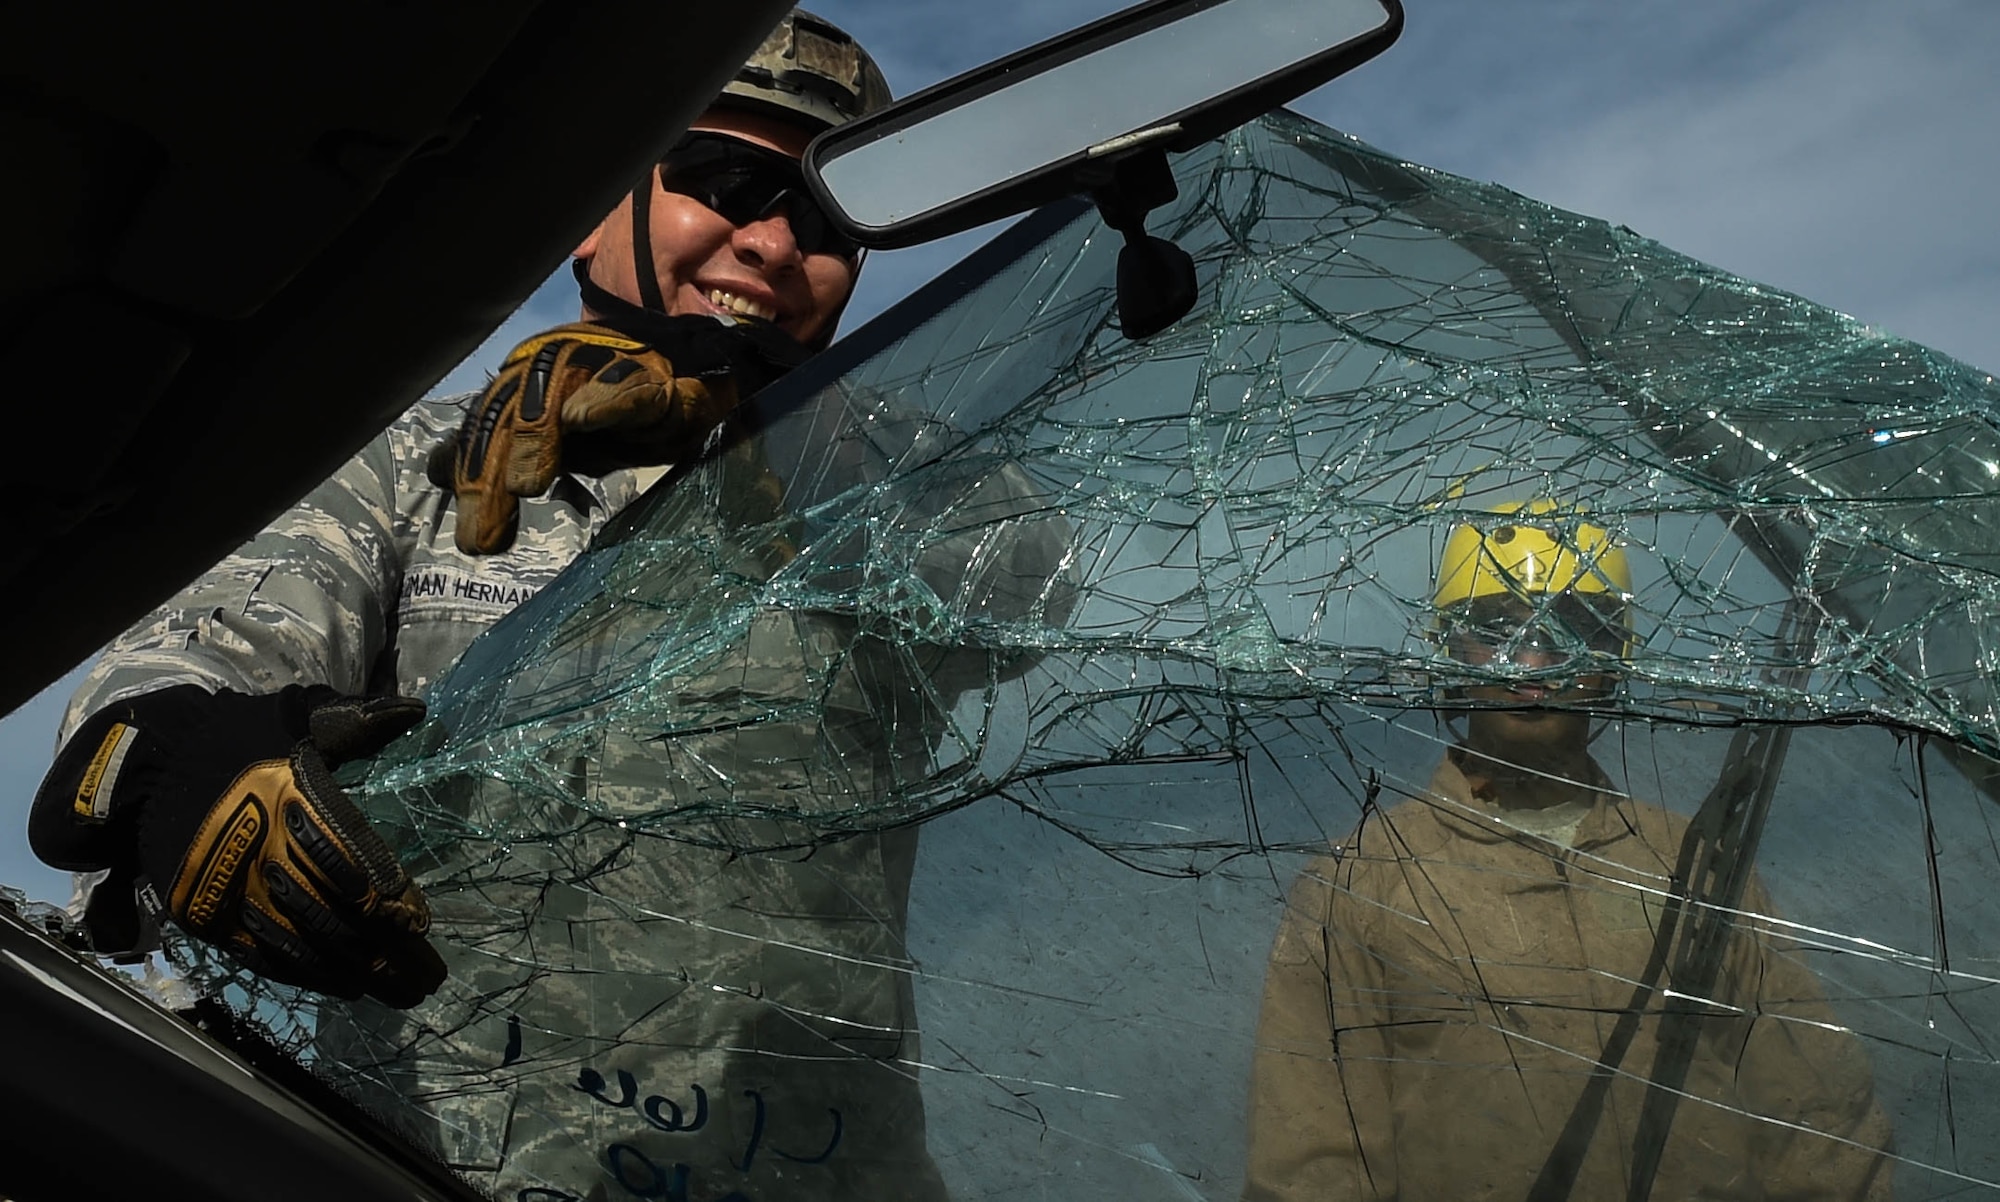 Tech. Sgt. Horacio Guzman Hernandez, 571st Mobility Support Advisory Squadron air advisor, pulls the windshield off the front of a vehicle to save a rescue dummy during vehicle extrication training April 7, 2016, at Travis Air Force Base, California. The Team Travis fire department worked with the 571st Mobility Support Advisory Squadron on vehicle extrication for future deployments to South and Central America. (U.S. Air Force photo by Staff  Sgt. Robert  Hicks/Released)      